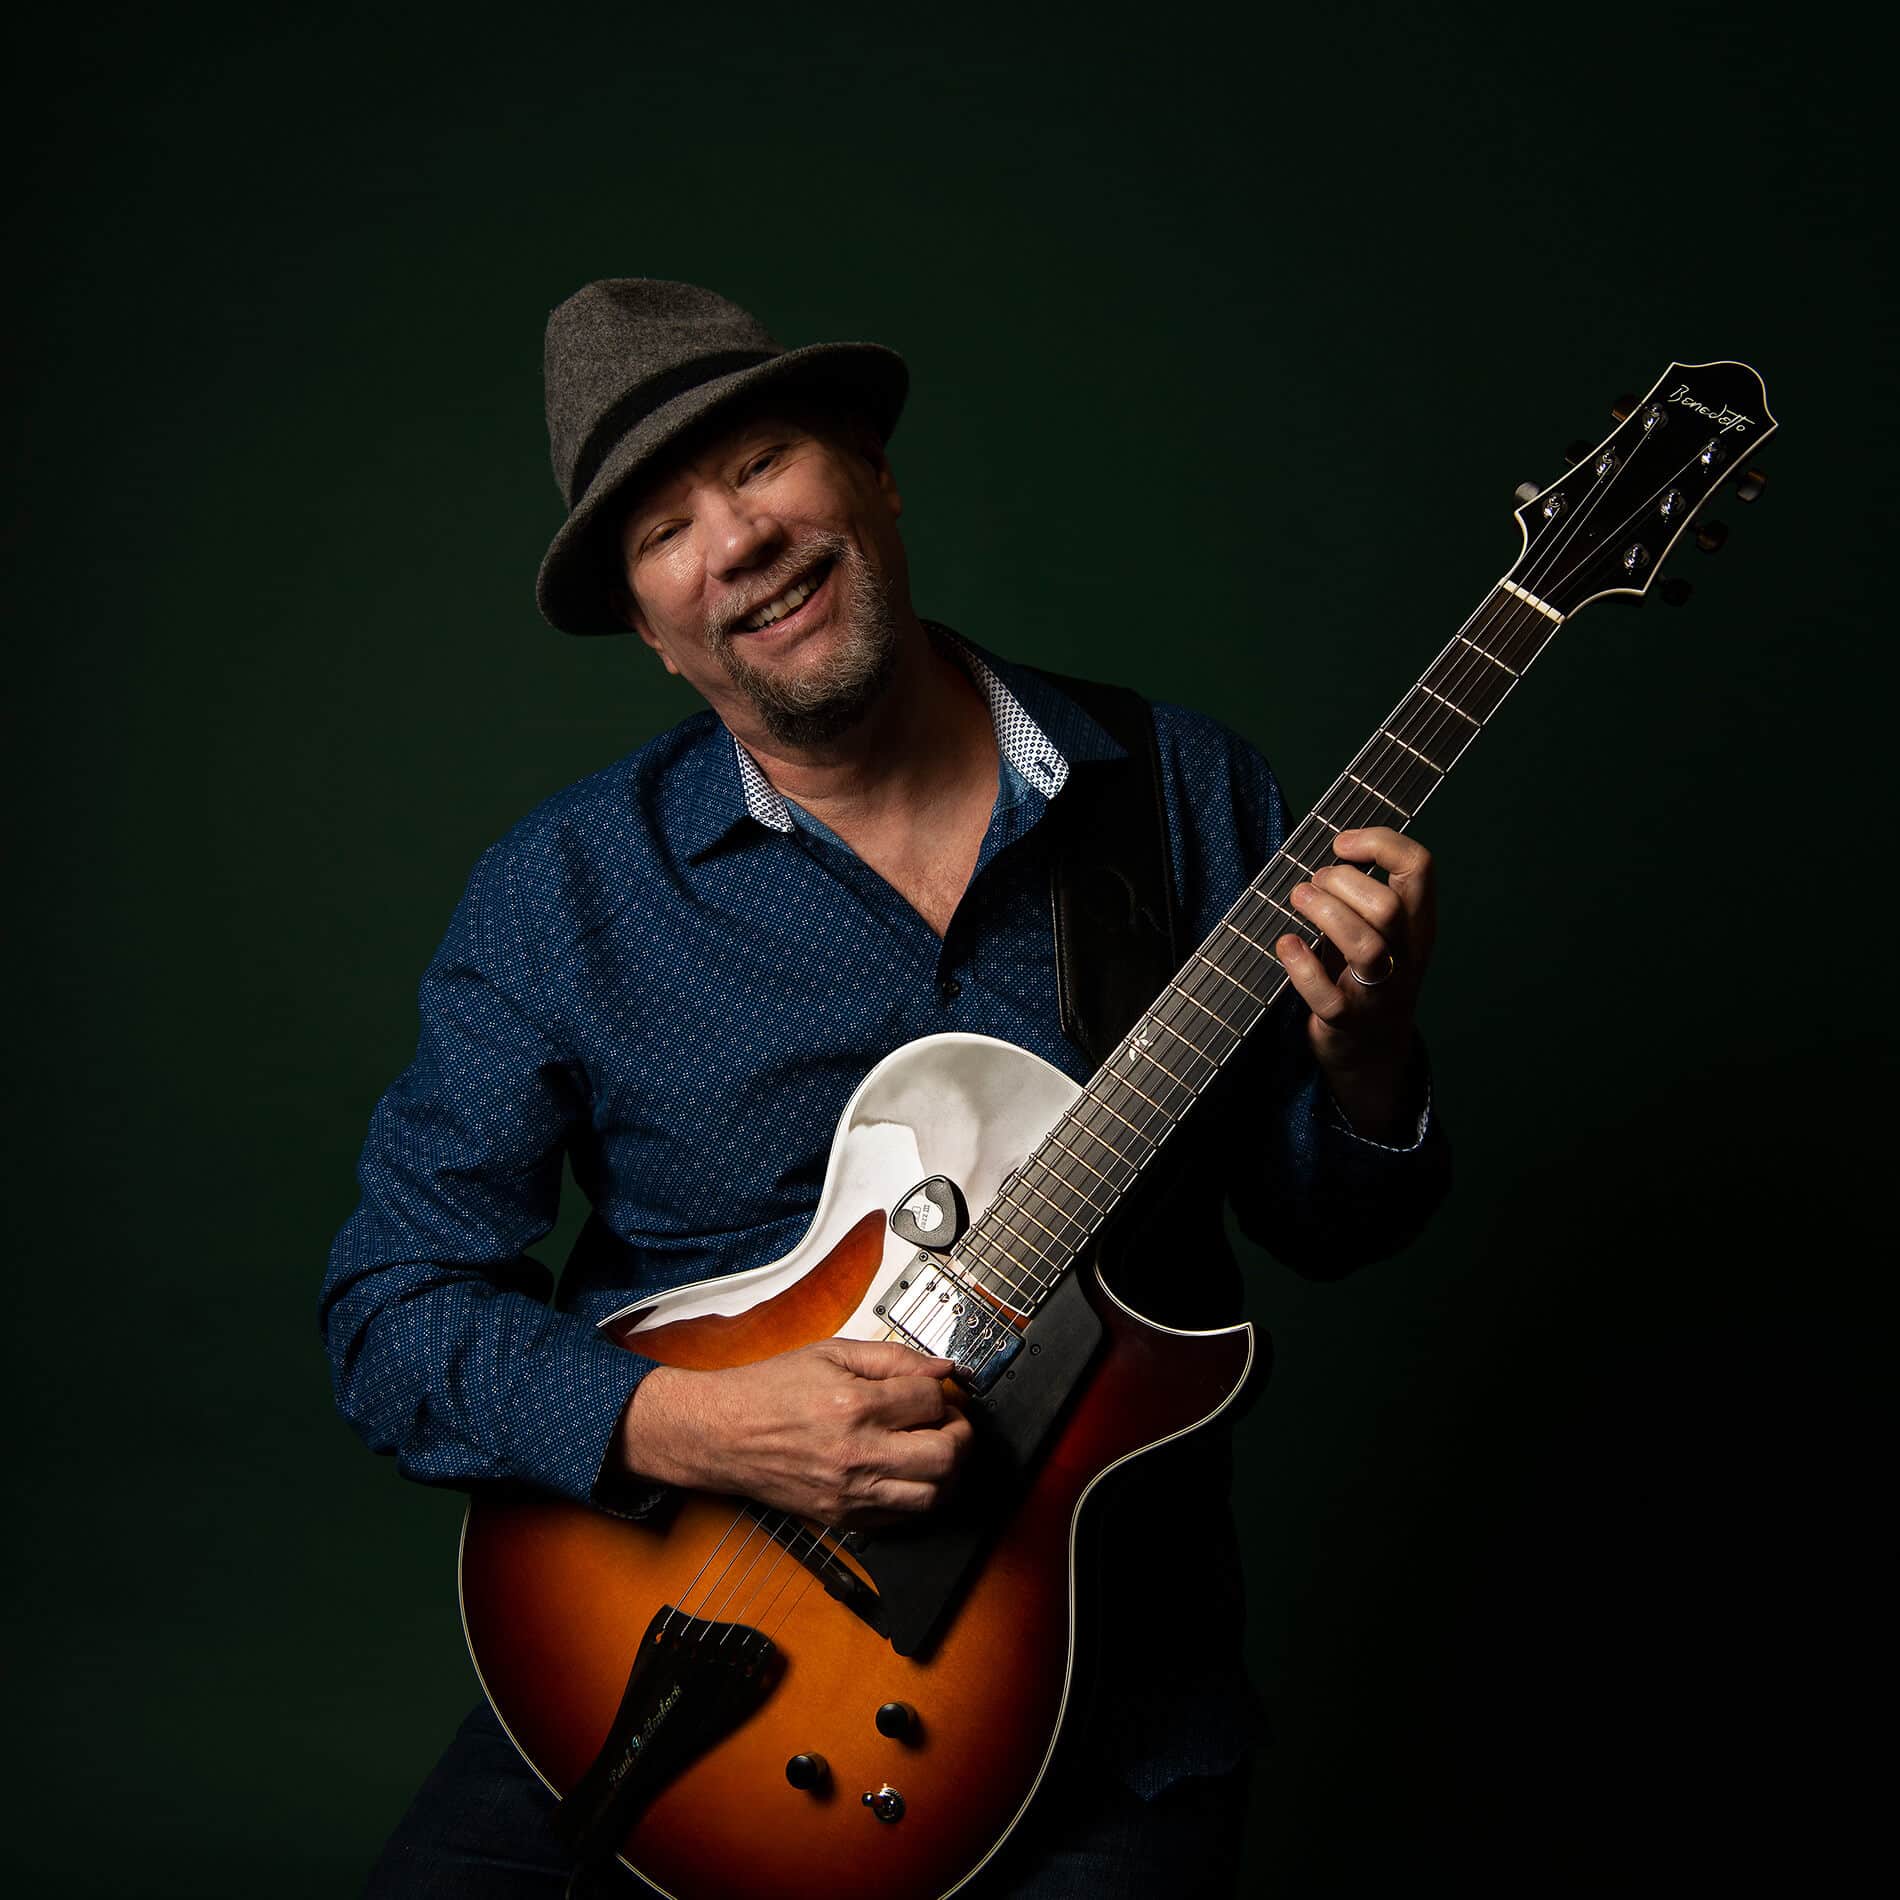 Paul Bollenback against a black background holding a Benedetto guitar.